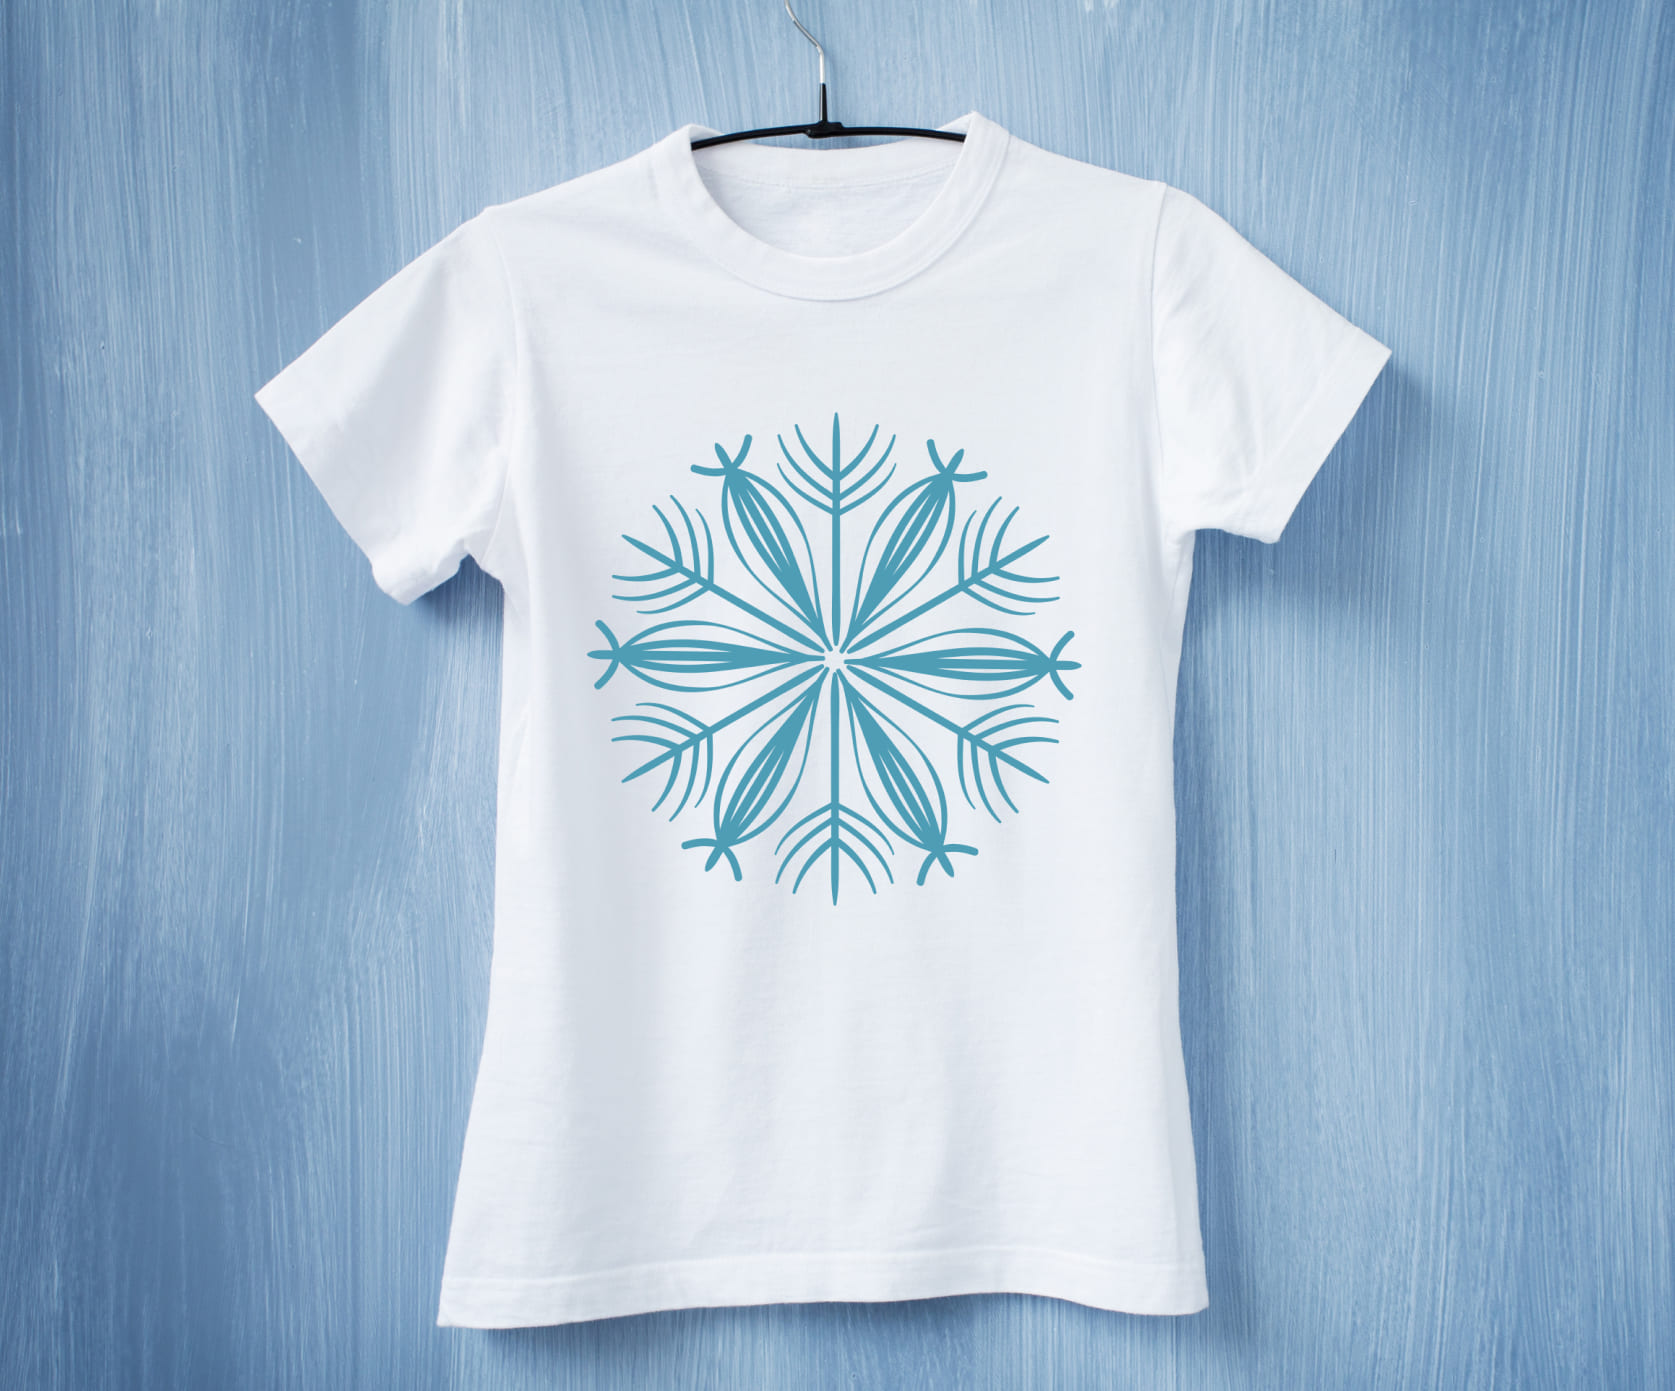 Flower snowflake ornament on the classic white t-shirt.